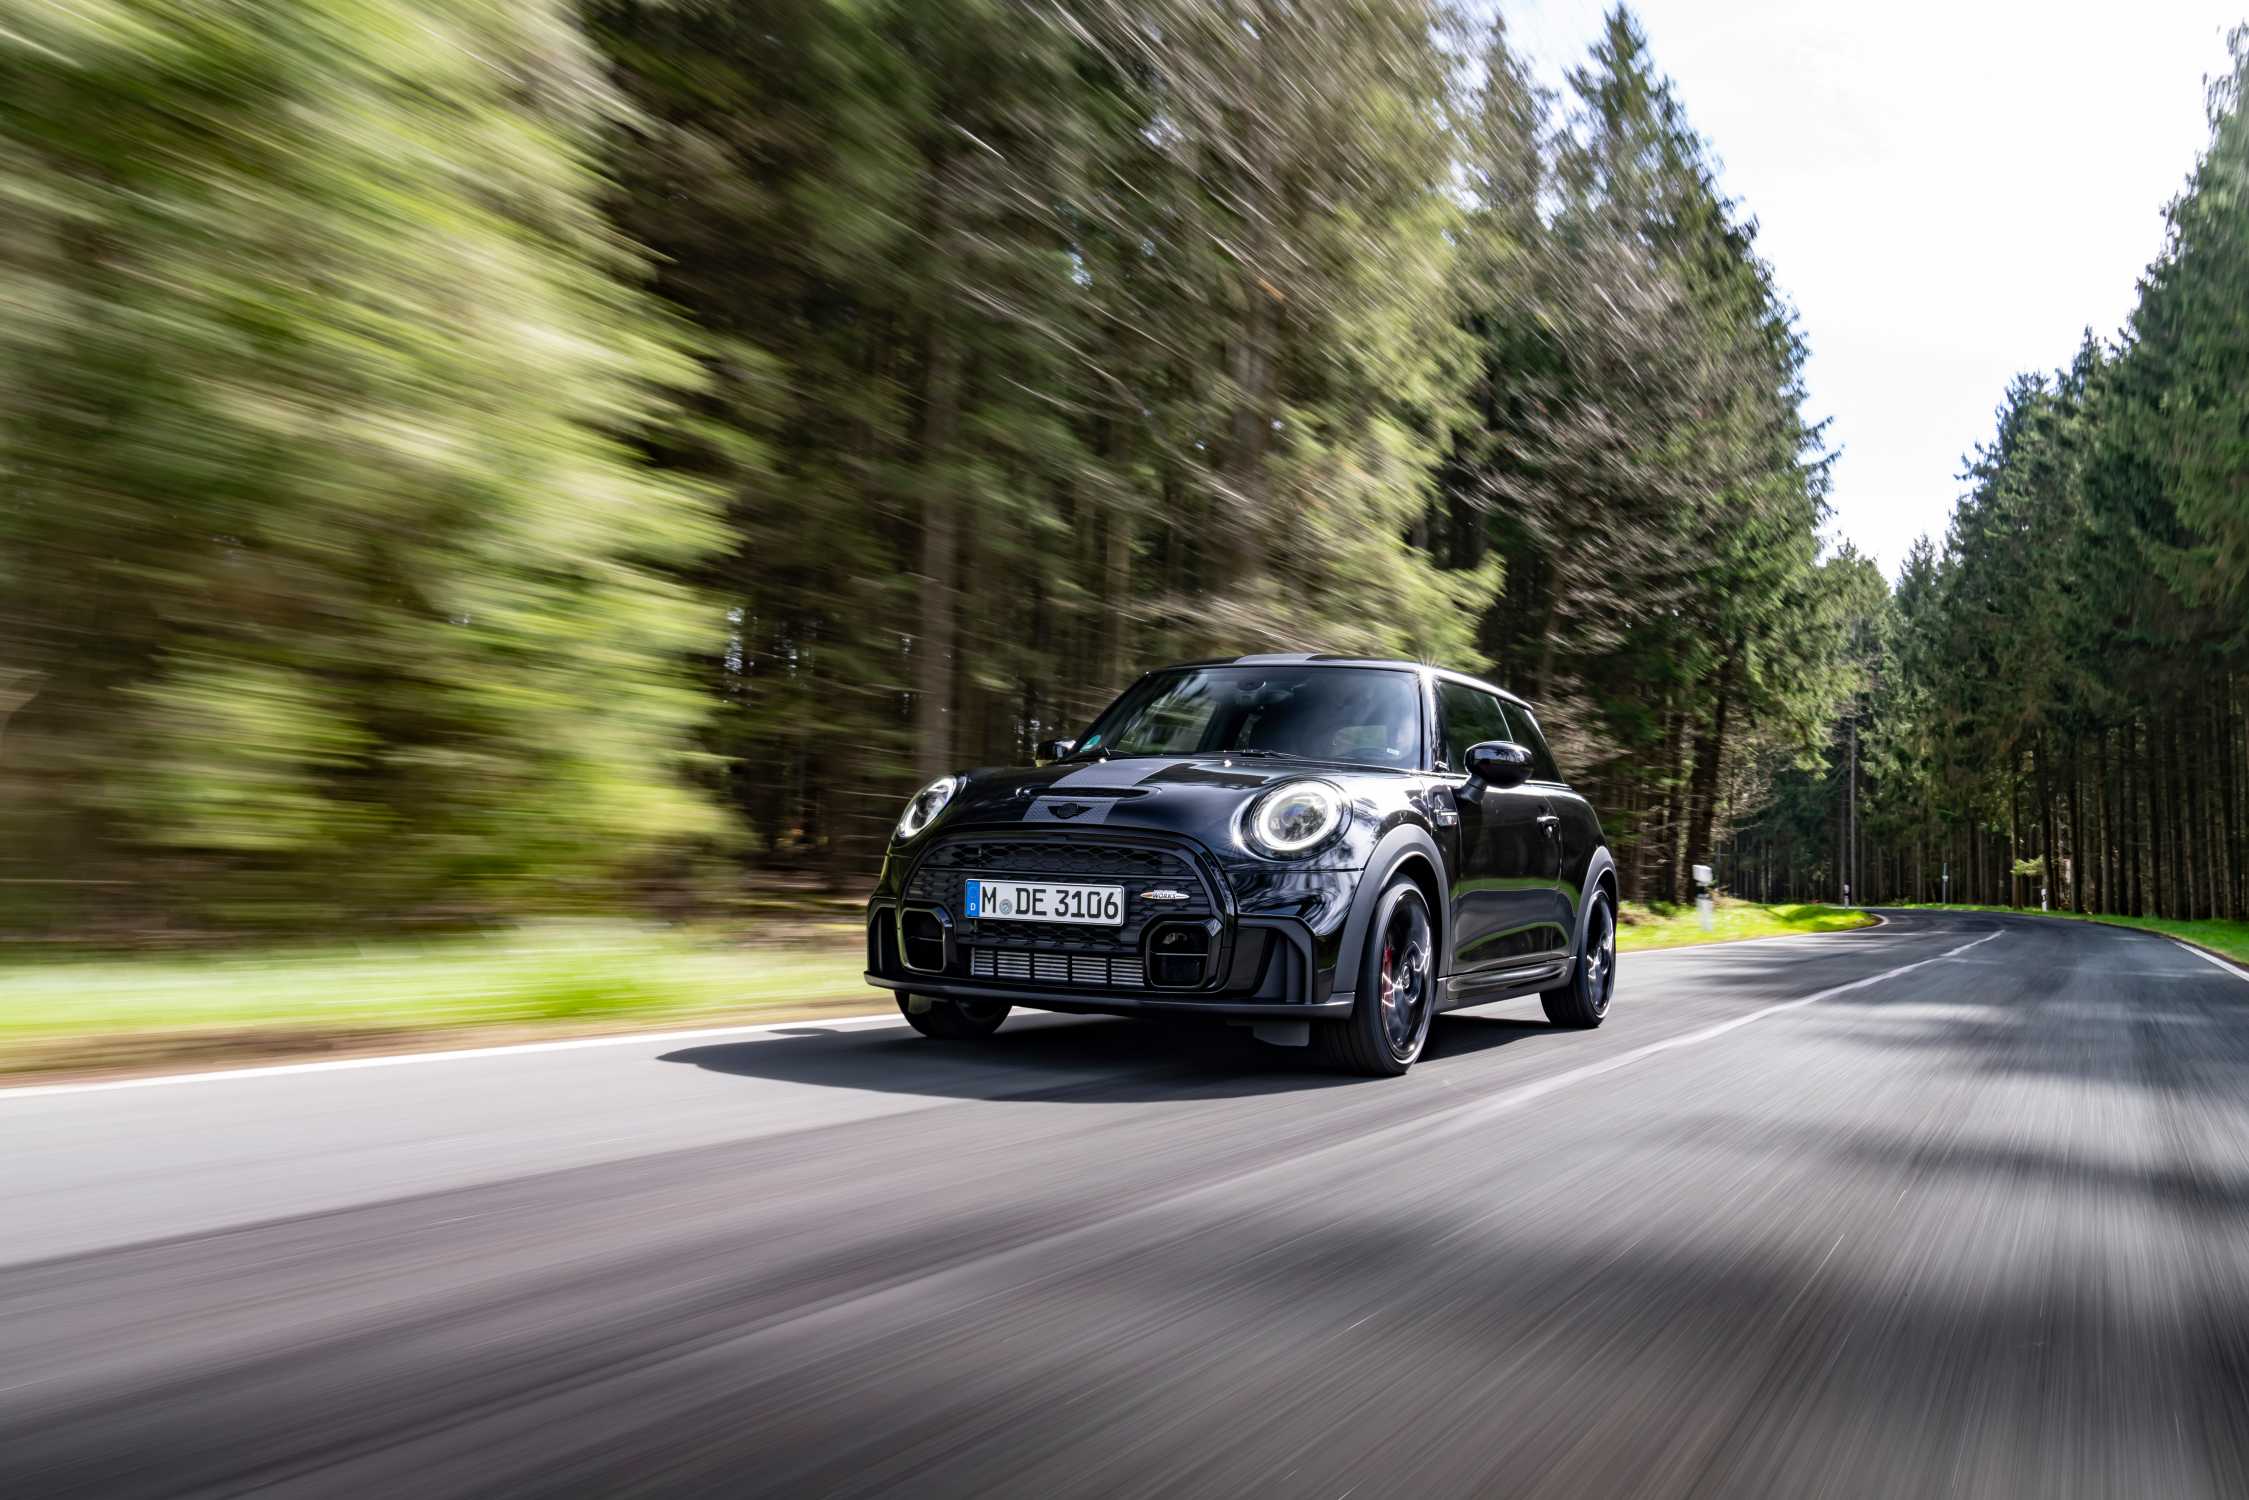 THE NEW MINI JOHN COOPER WORKS 1to6 EDITION.